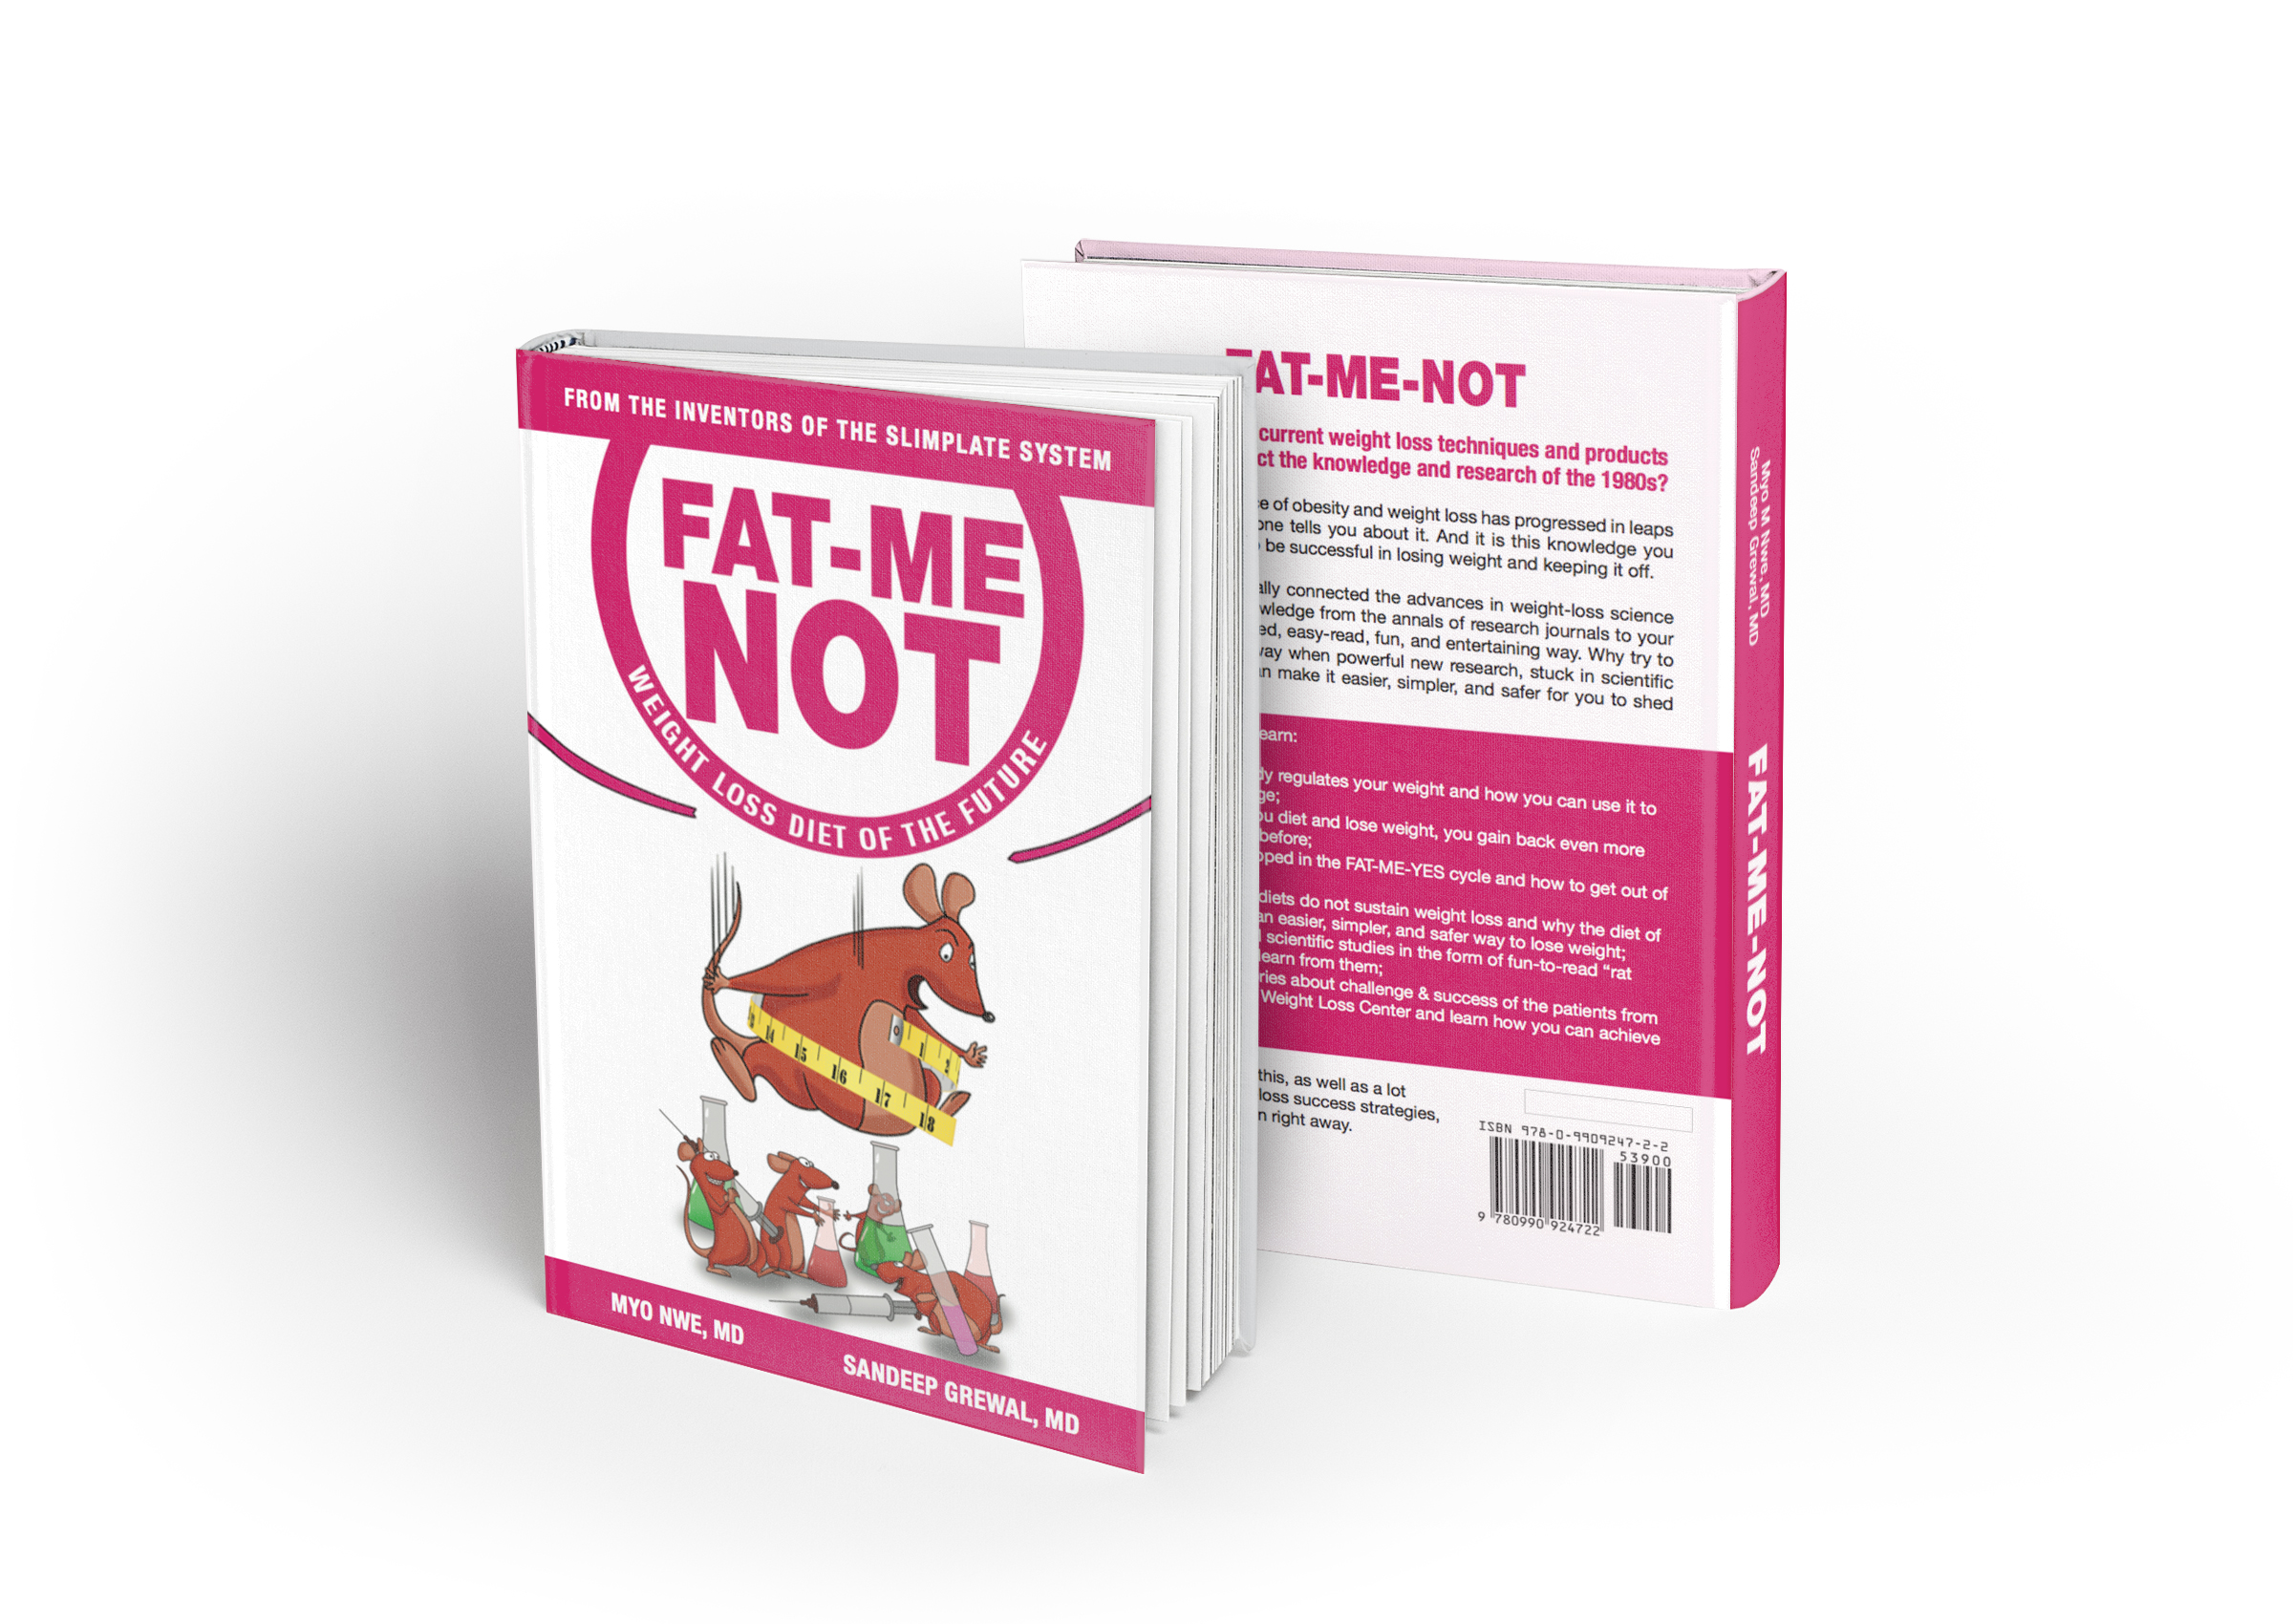 Fat-Me-Not: Weight Loss Diet Of The Future